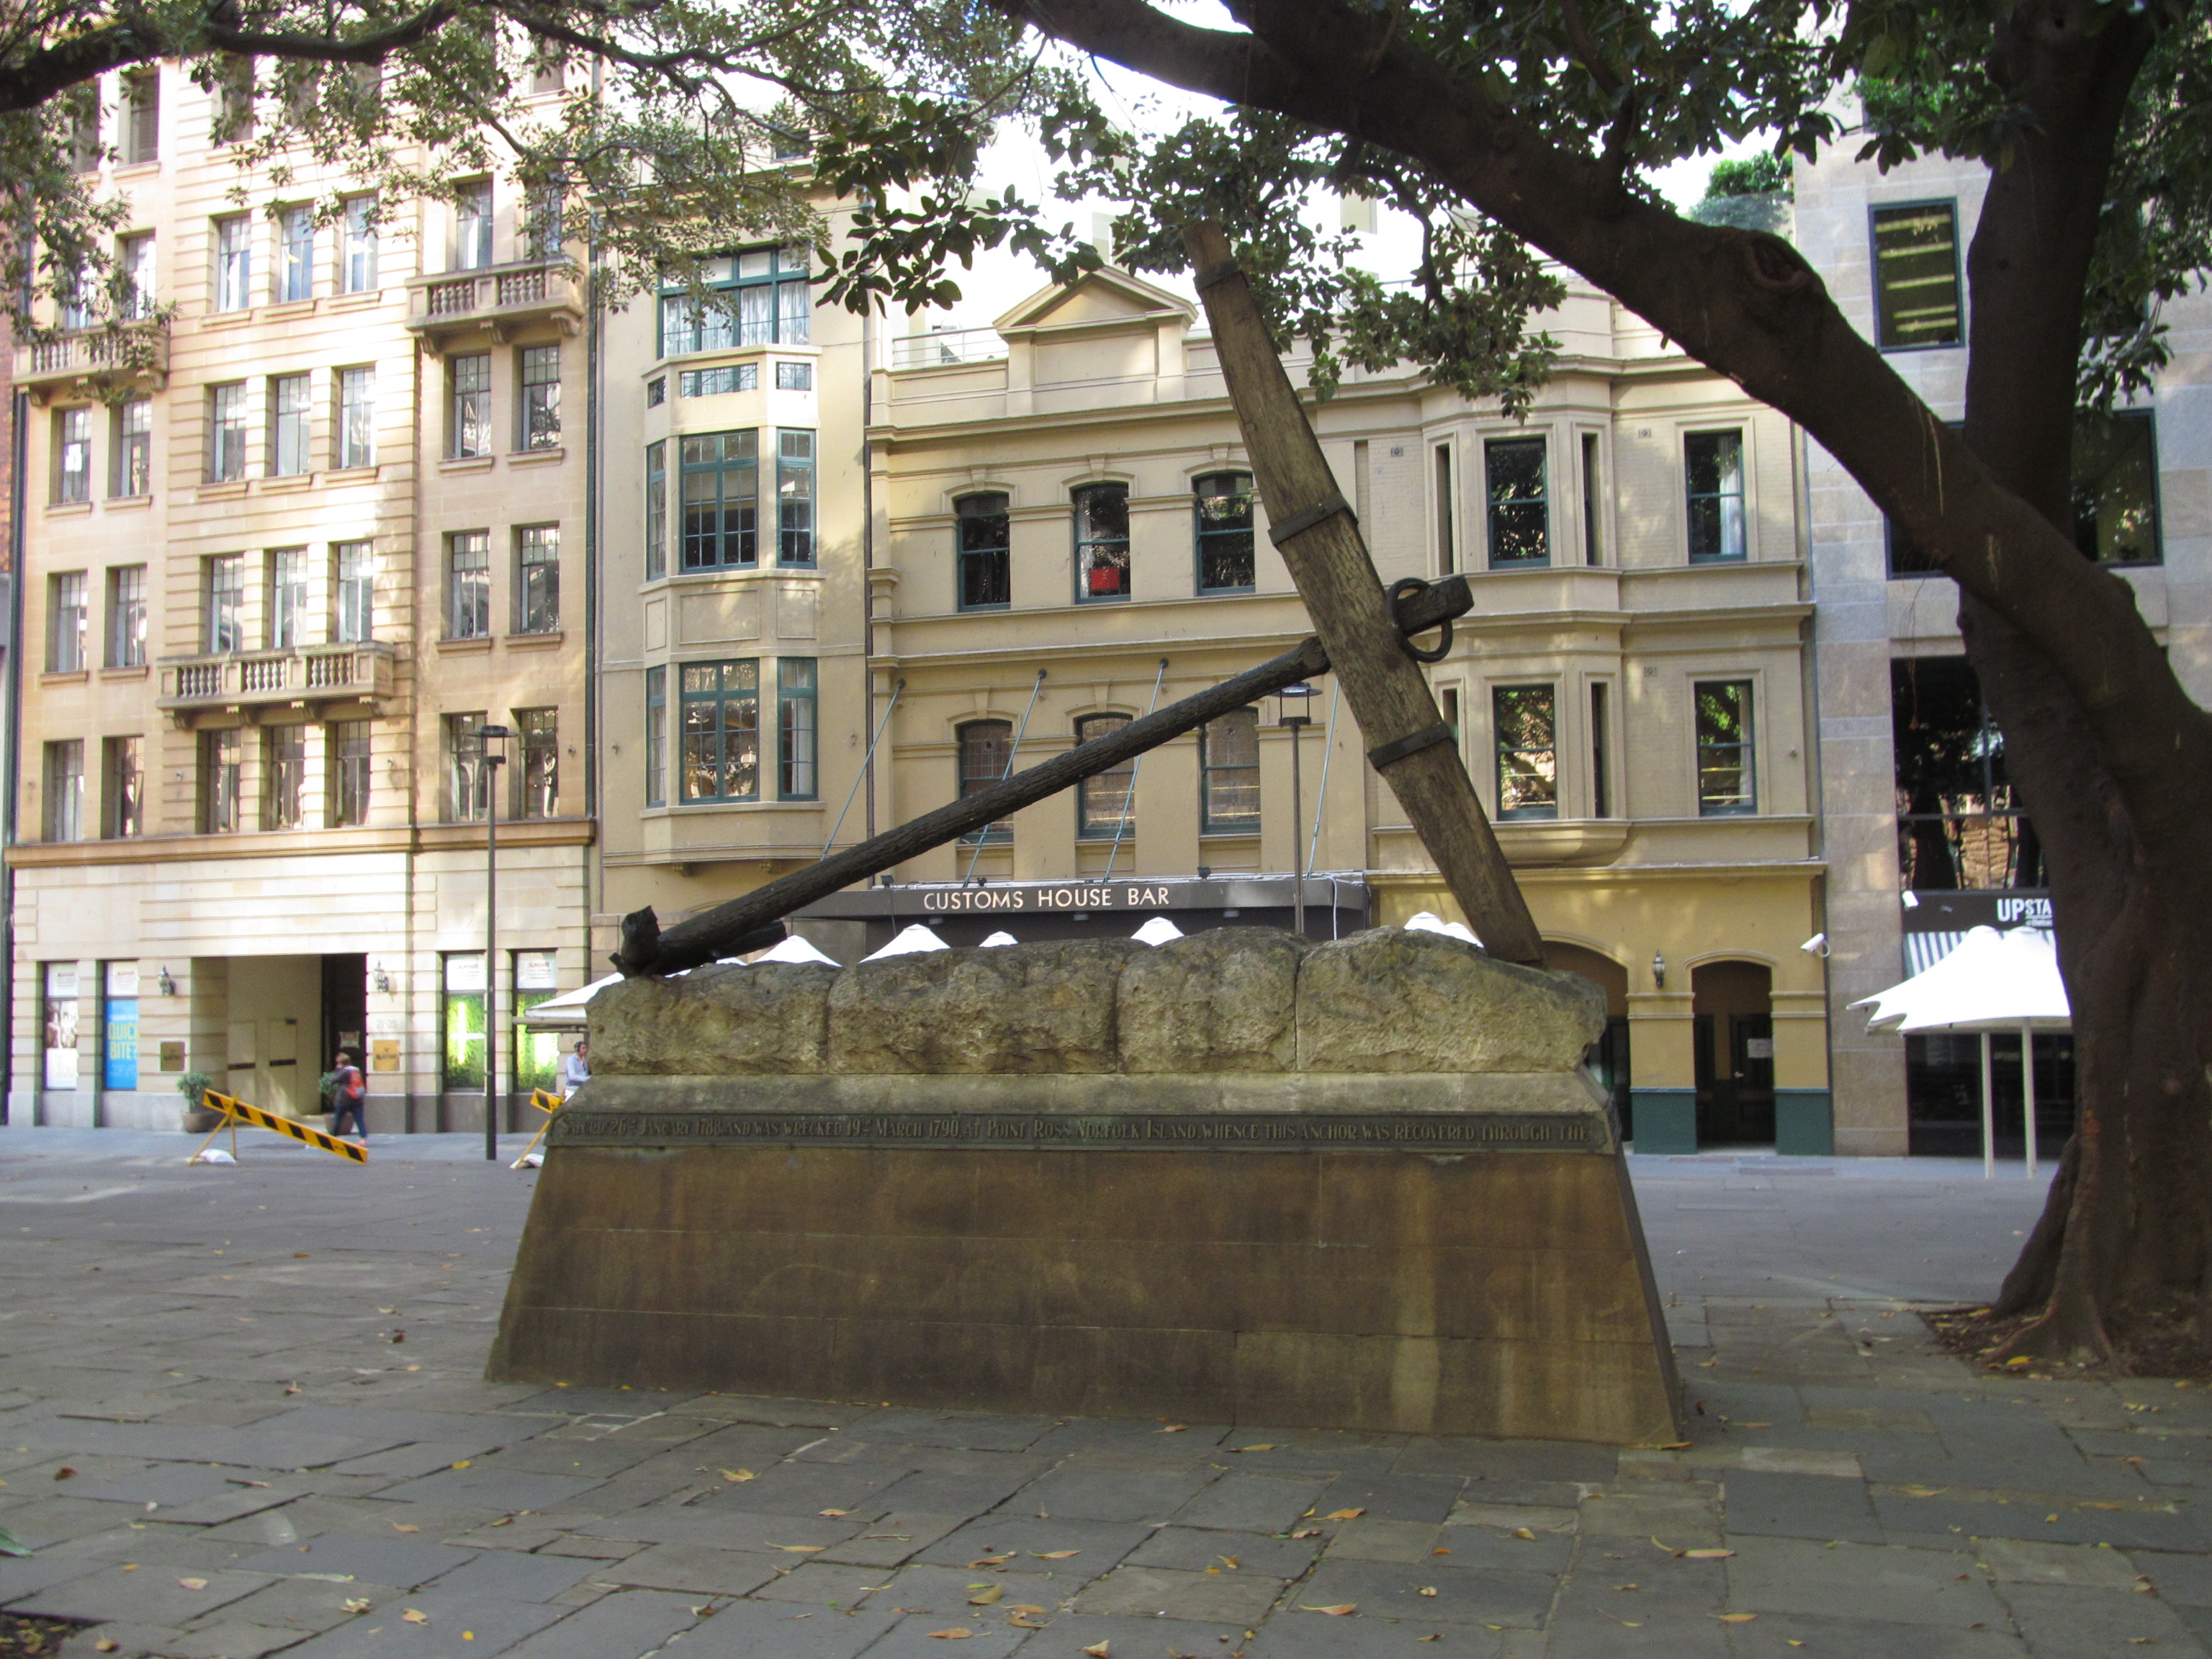 Anchor of the H. M. S. Sirius, one of the ships of the First Fleet, on display in Sydney, Australia